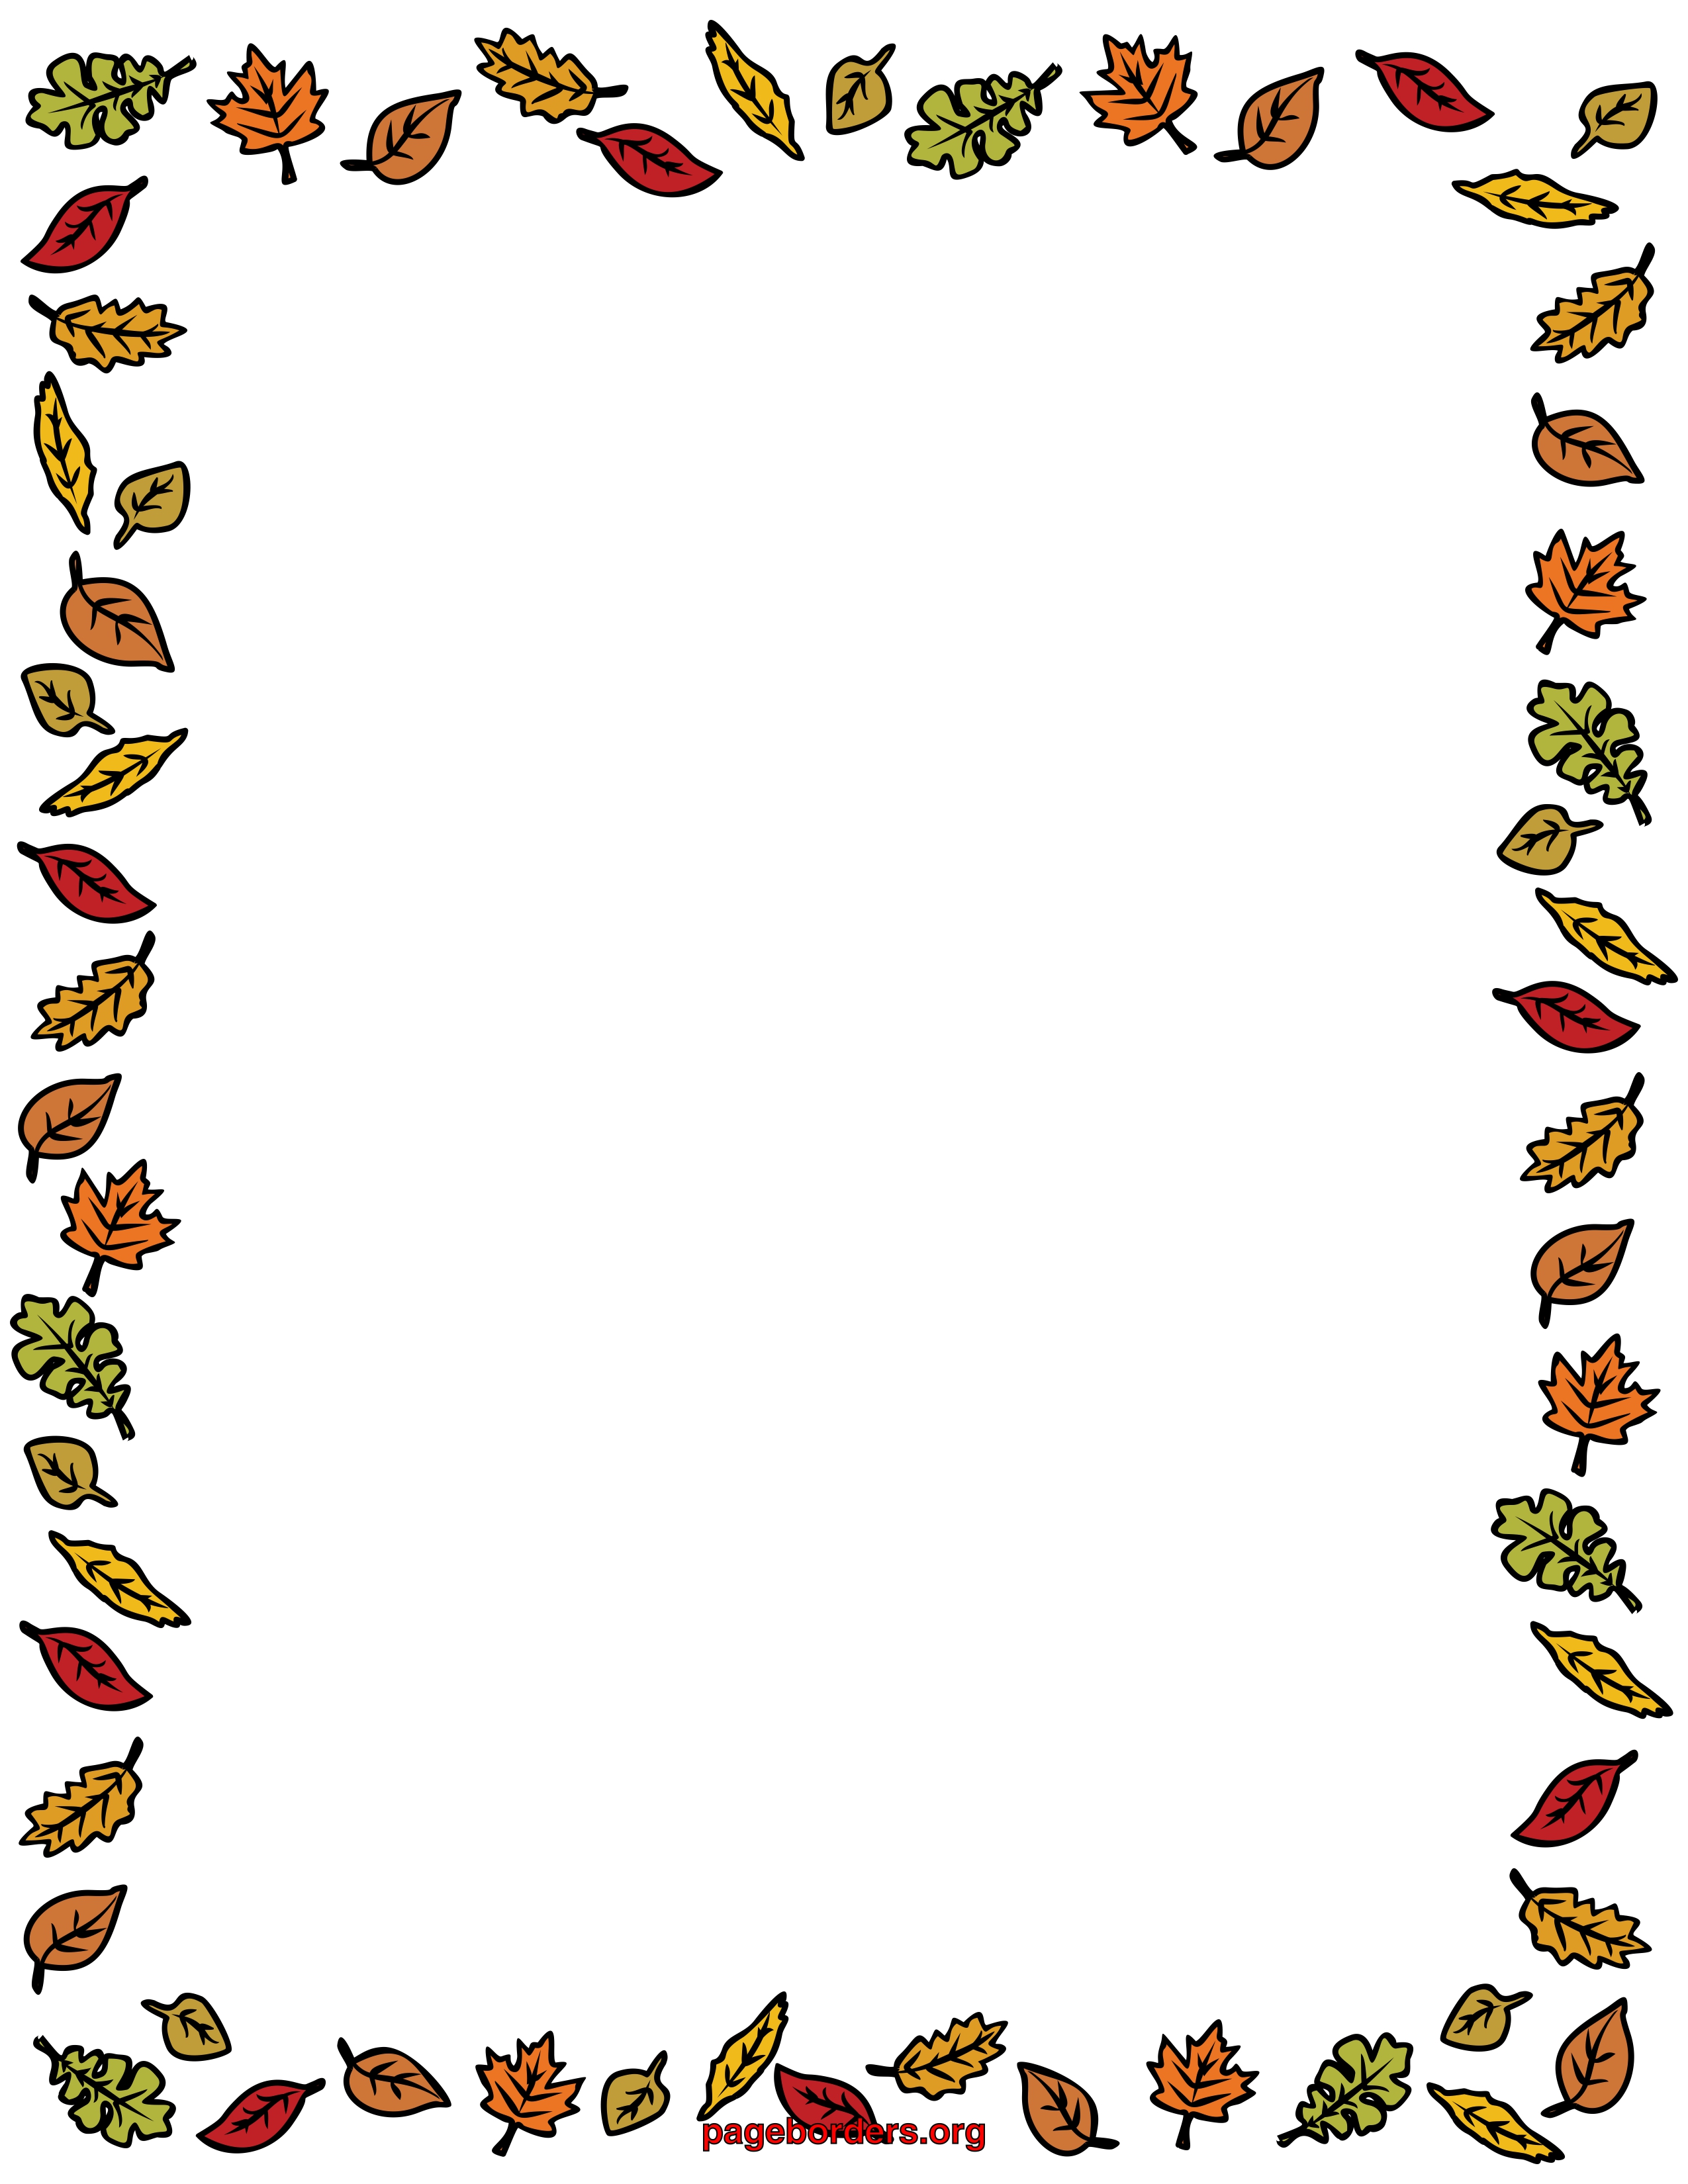 Free Stationery Borders ClipArt Best